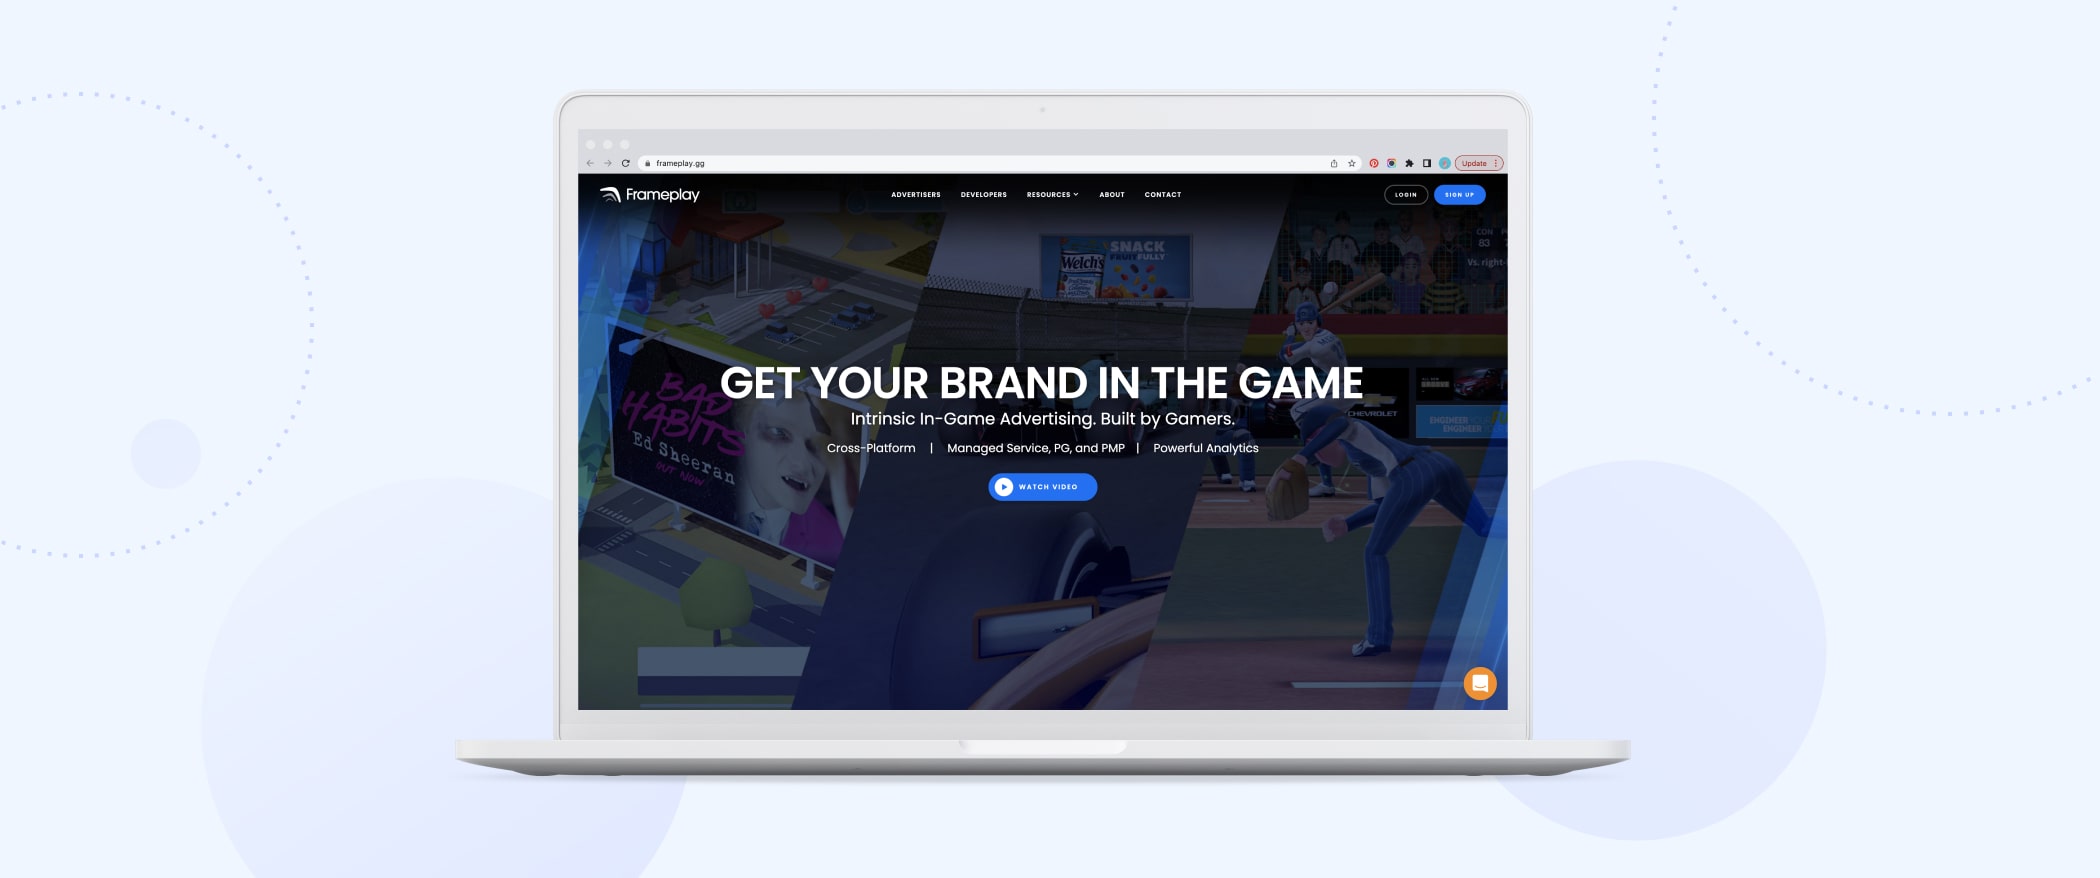 Frameplay in-game advertising company - Xenoss blog - In-Game Advertising